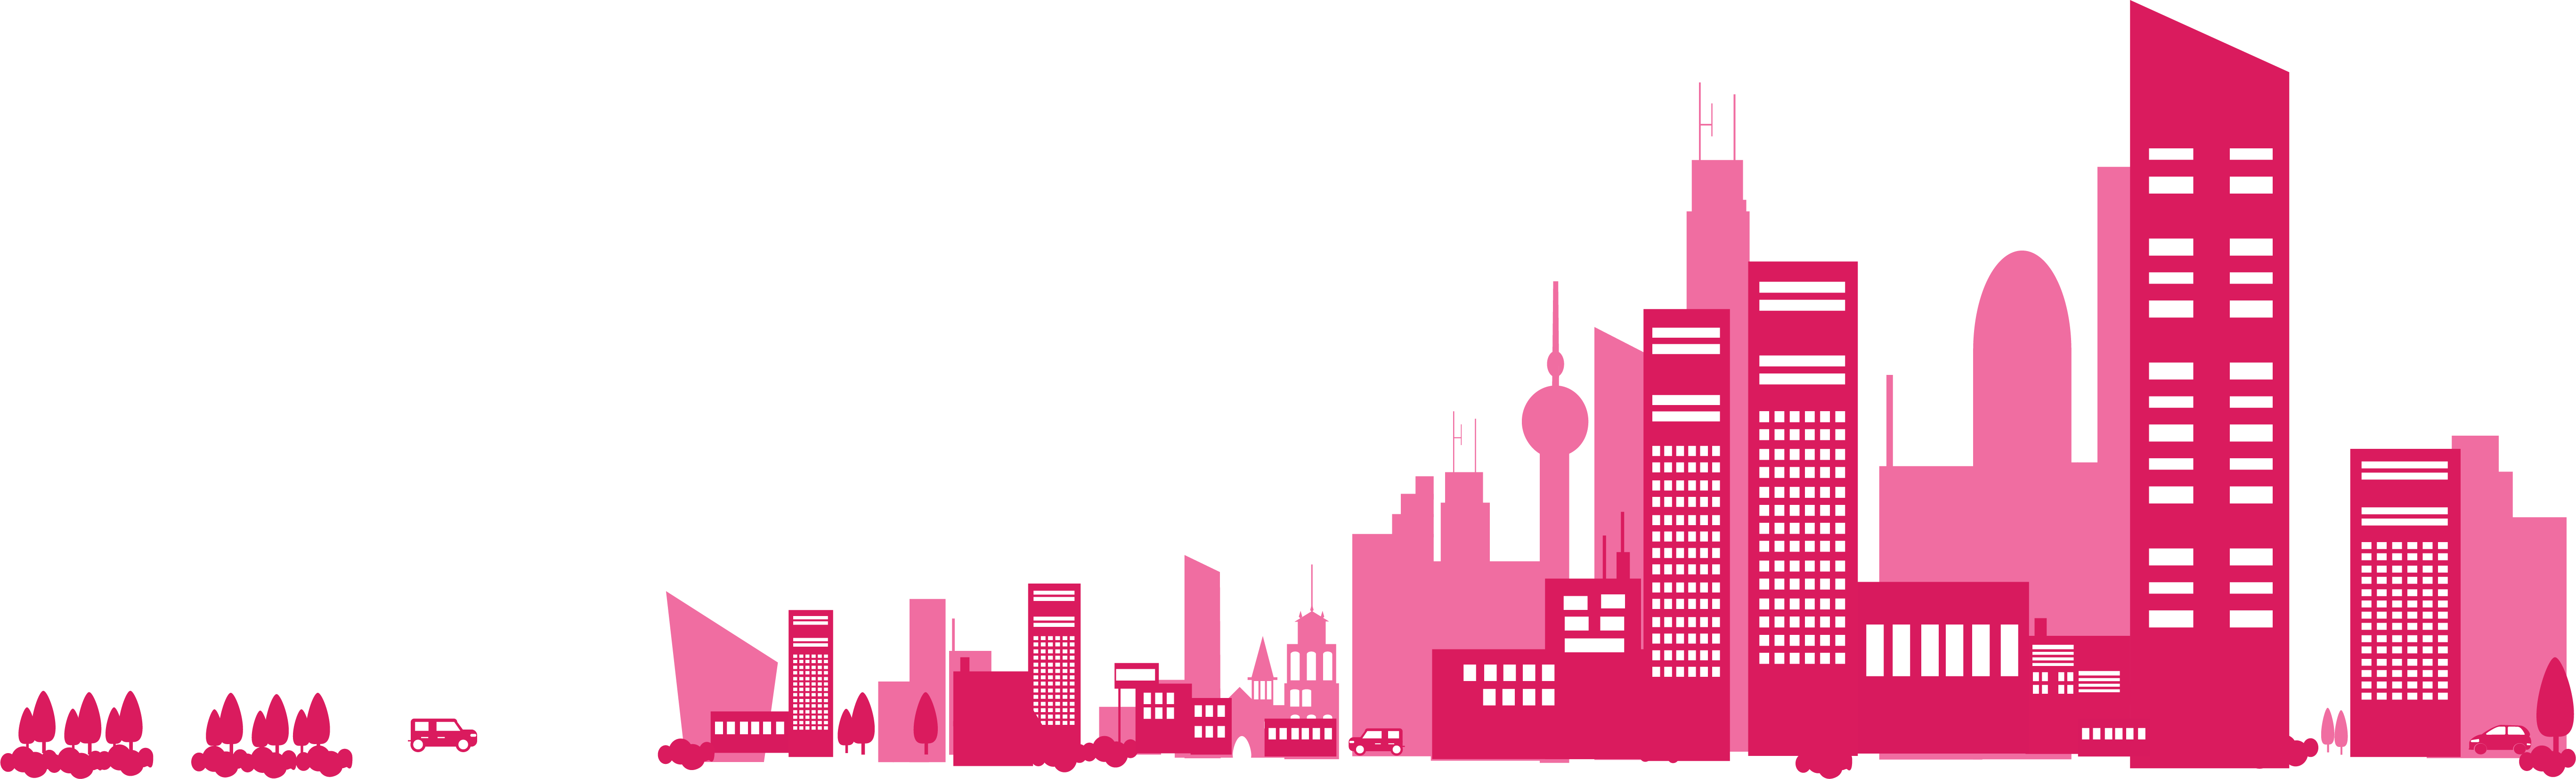 Request A Demo - Pink City Skyline Transparent Clipart - Large Size Png ...